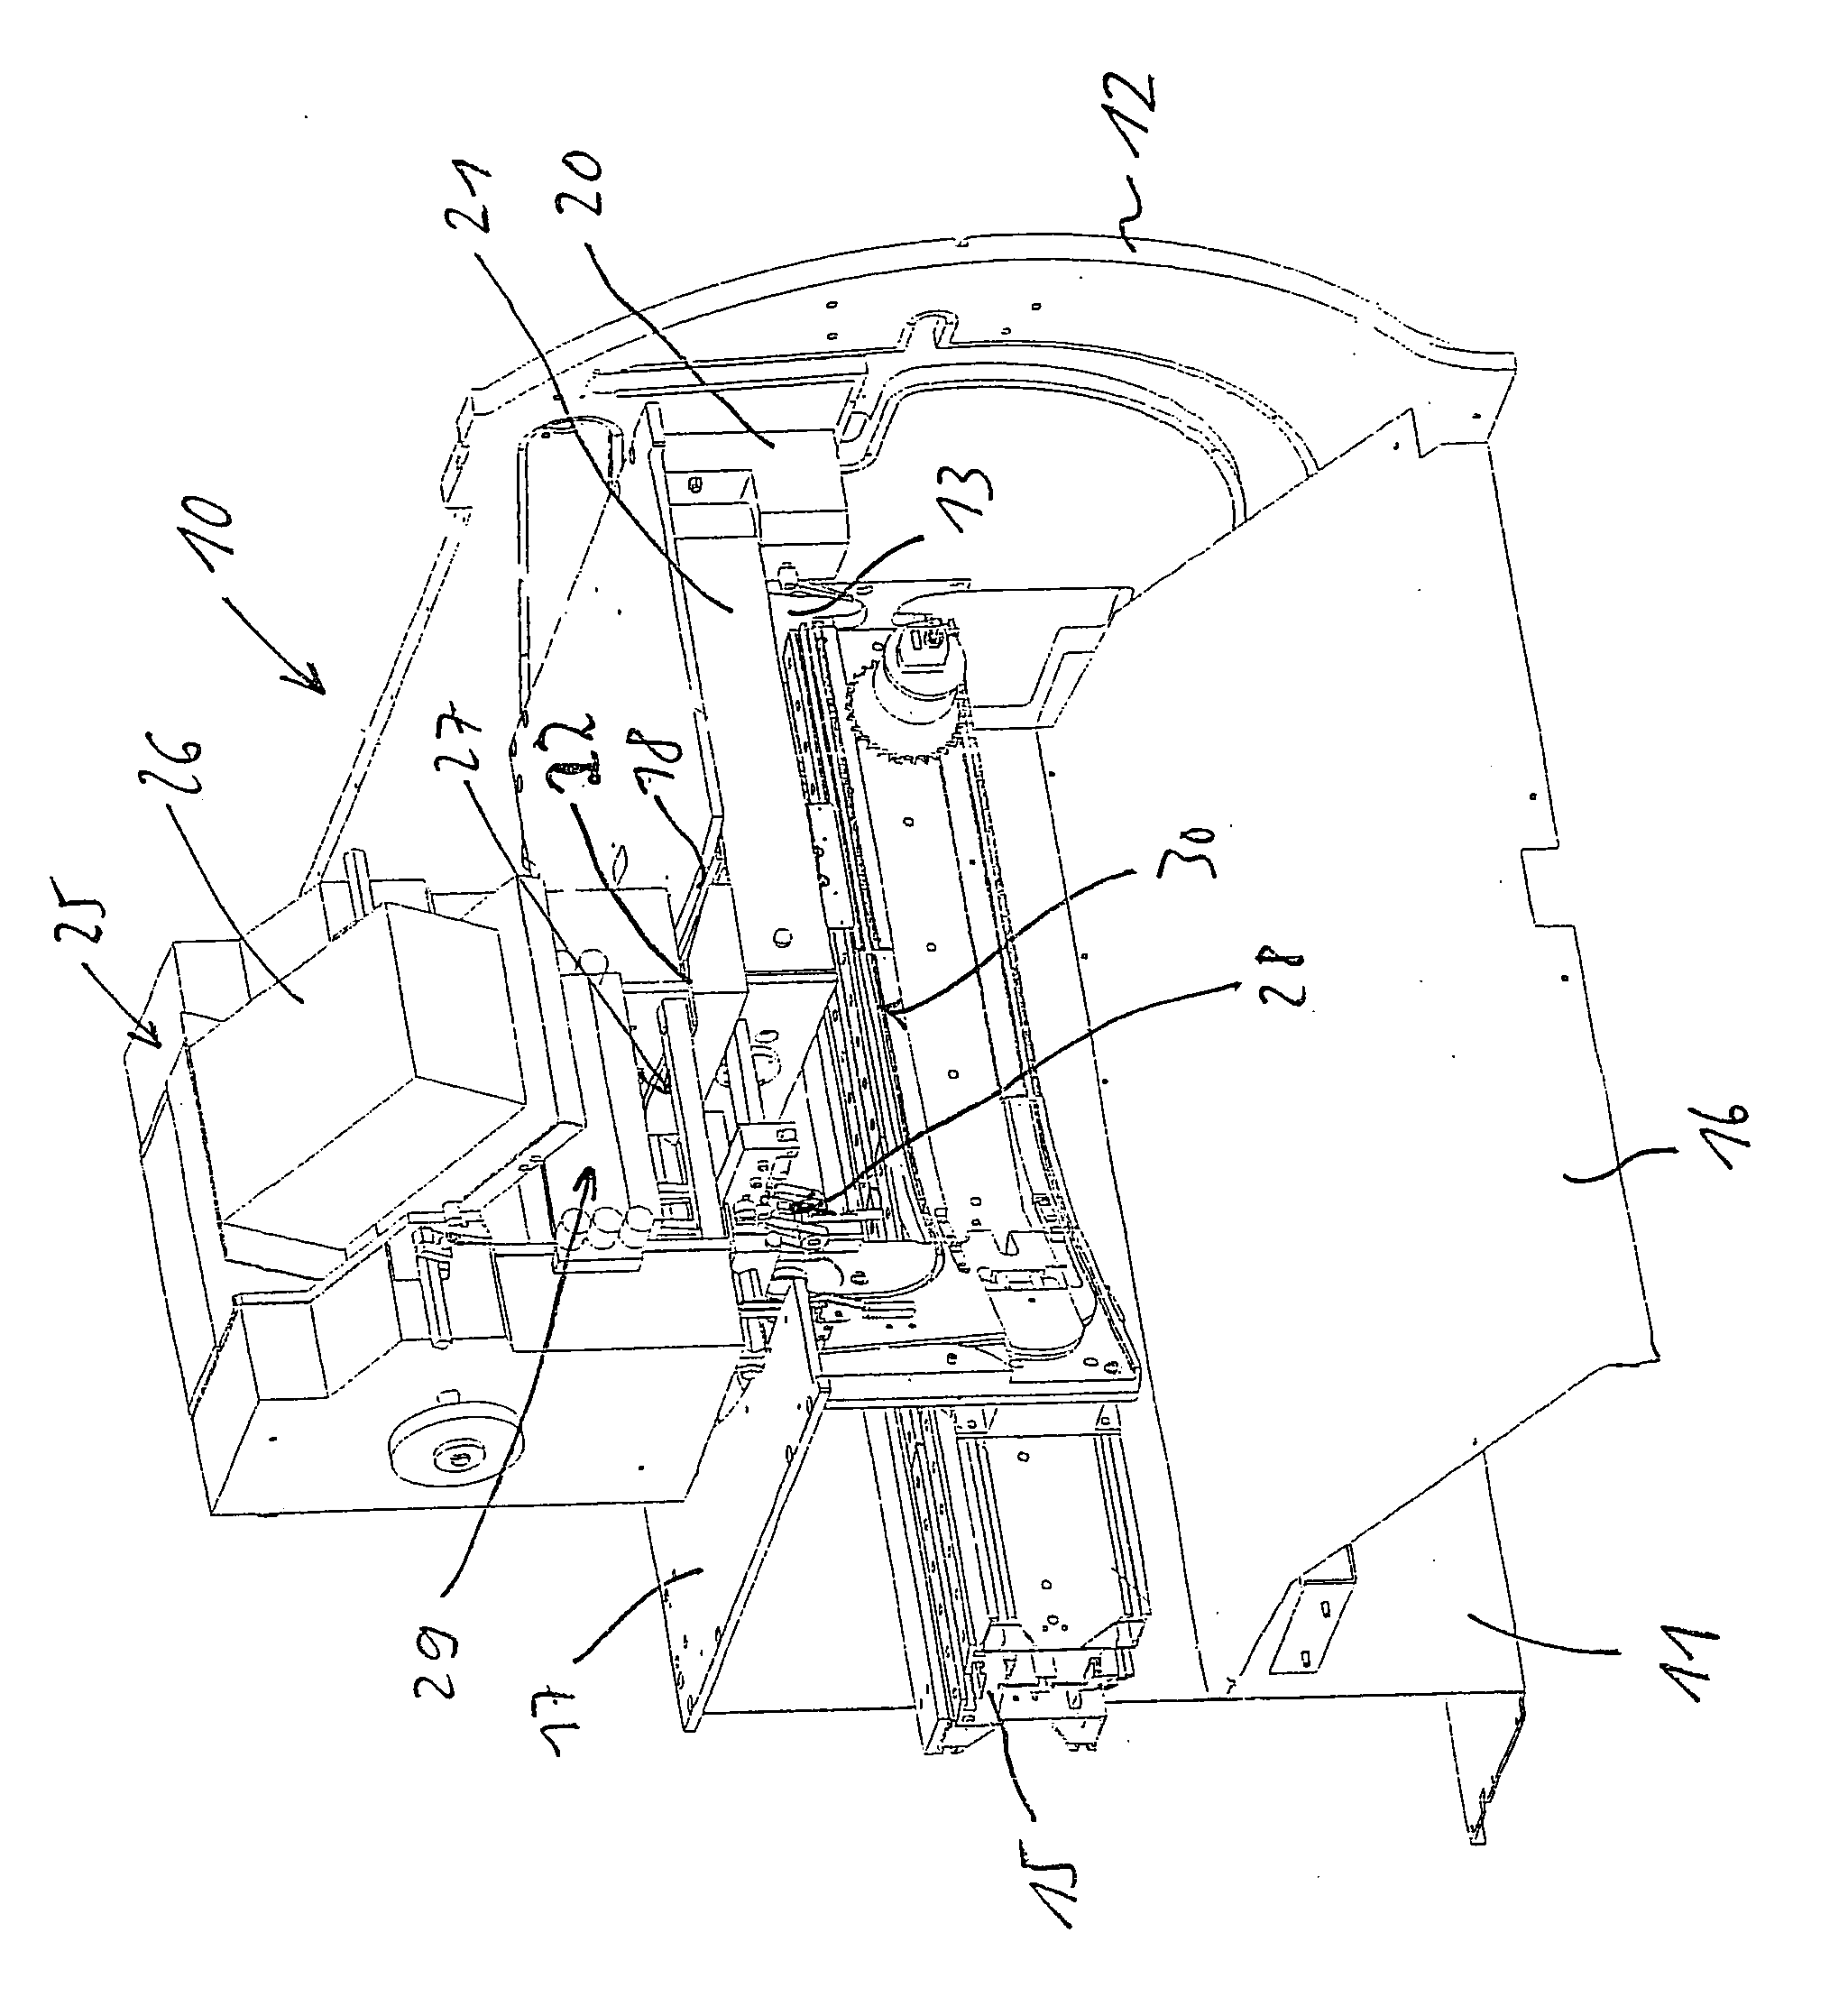 Apparatus for delivering package inserts or the like to folding boxes in a packaging machine